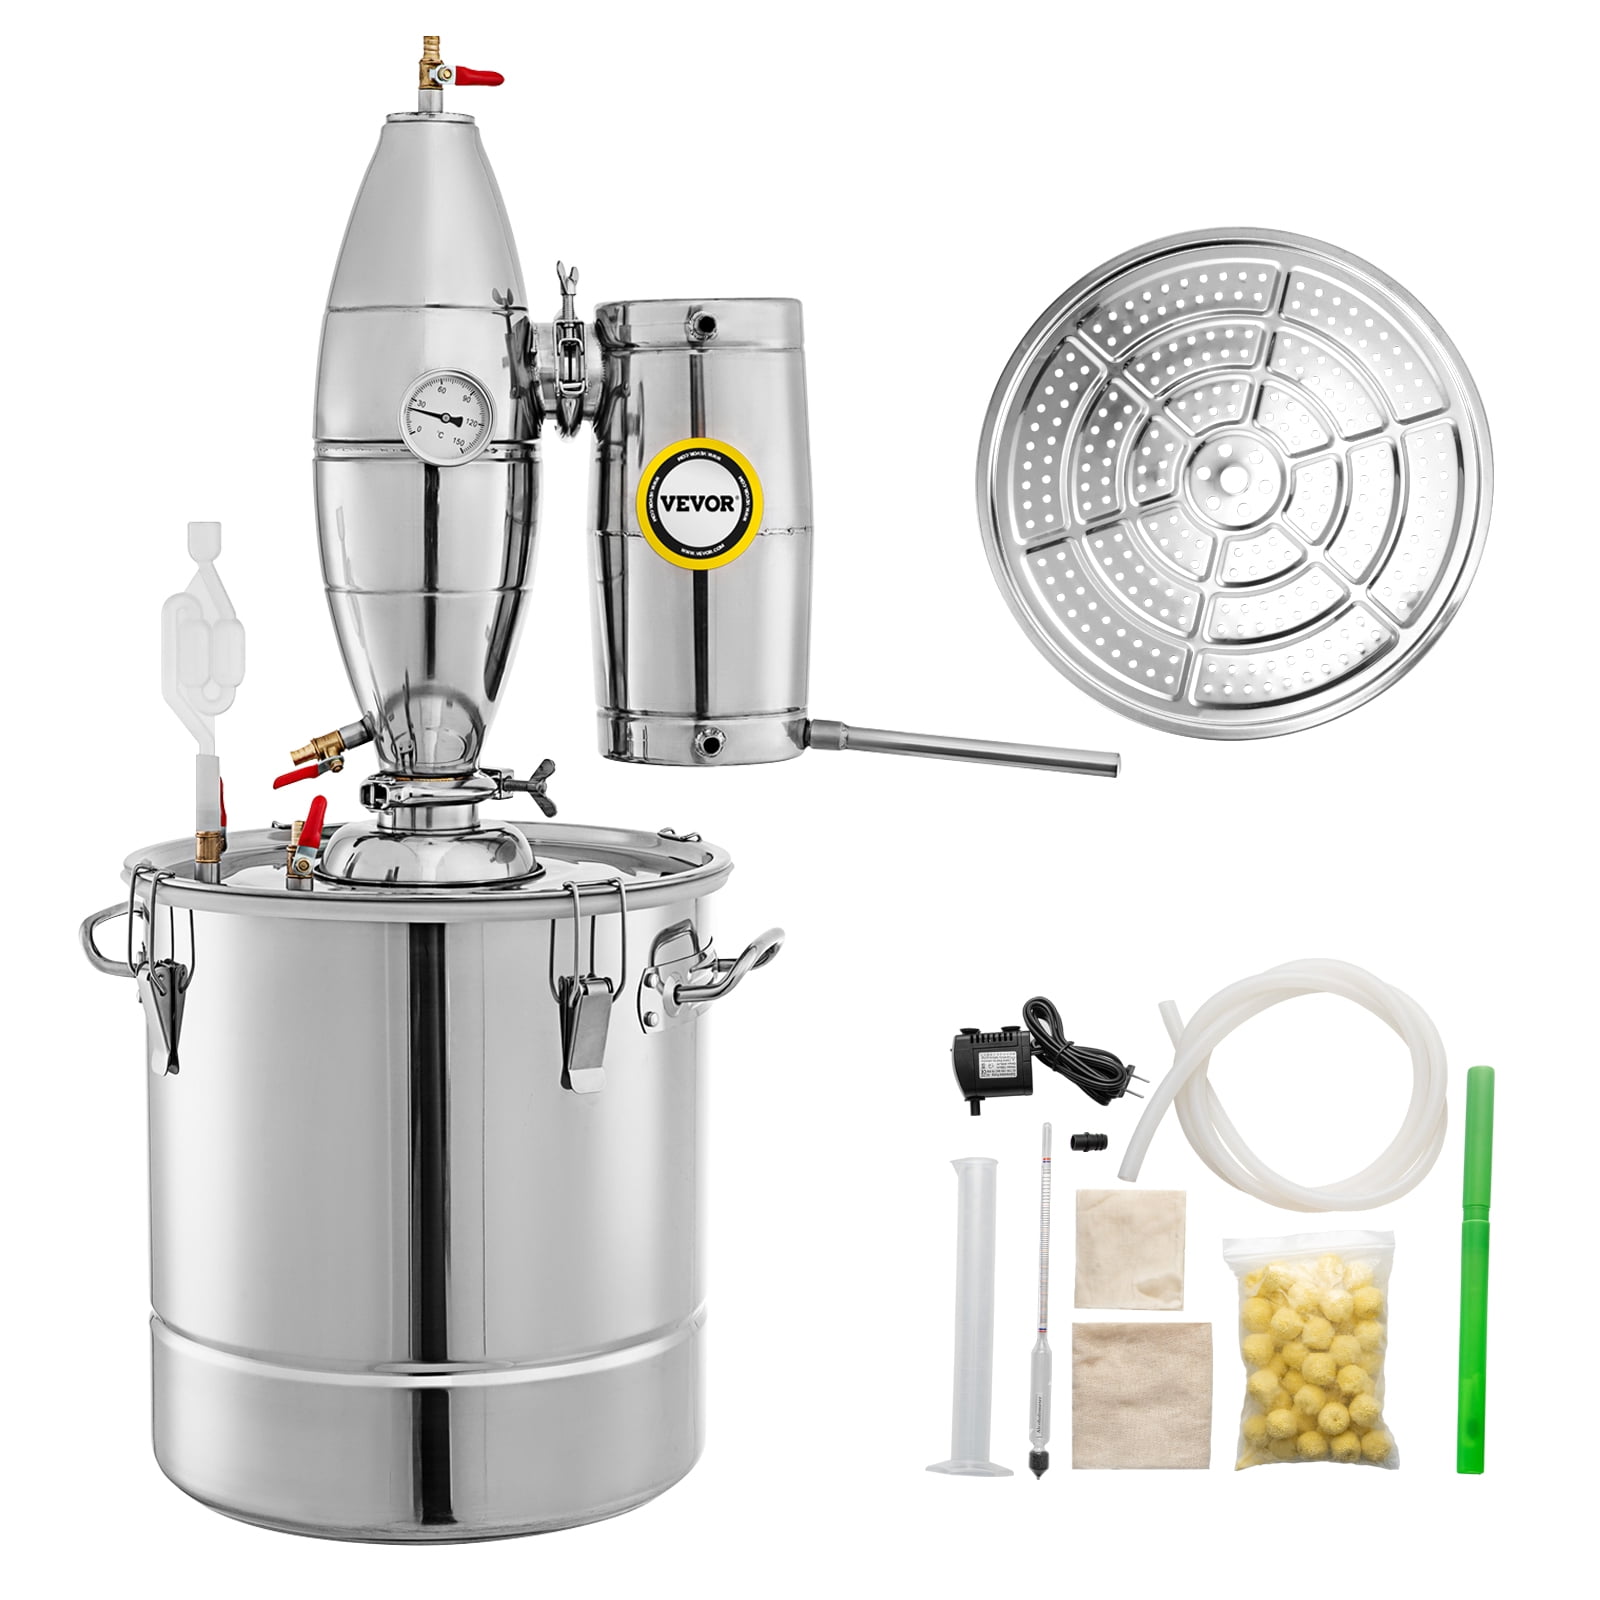 9.6Gal 38L Alcohol Distiller with Built-in Thermometer Submersible Pump for Home Brewing Whiskey Brandy Essential SmarketBuy Moonshine Still 